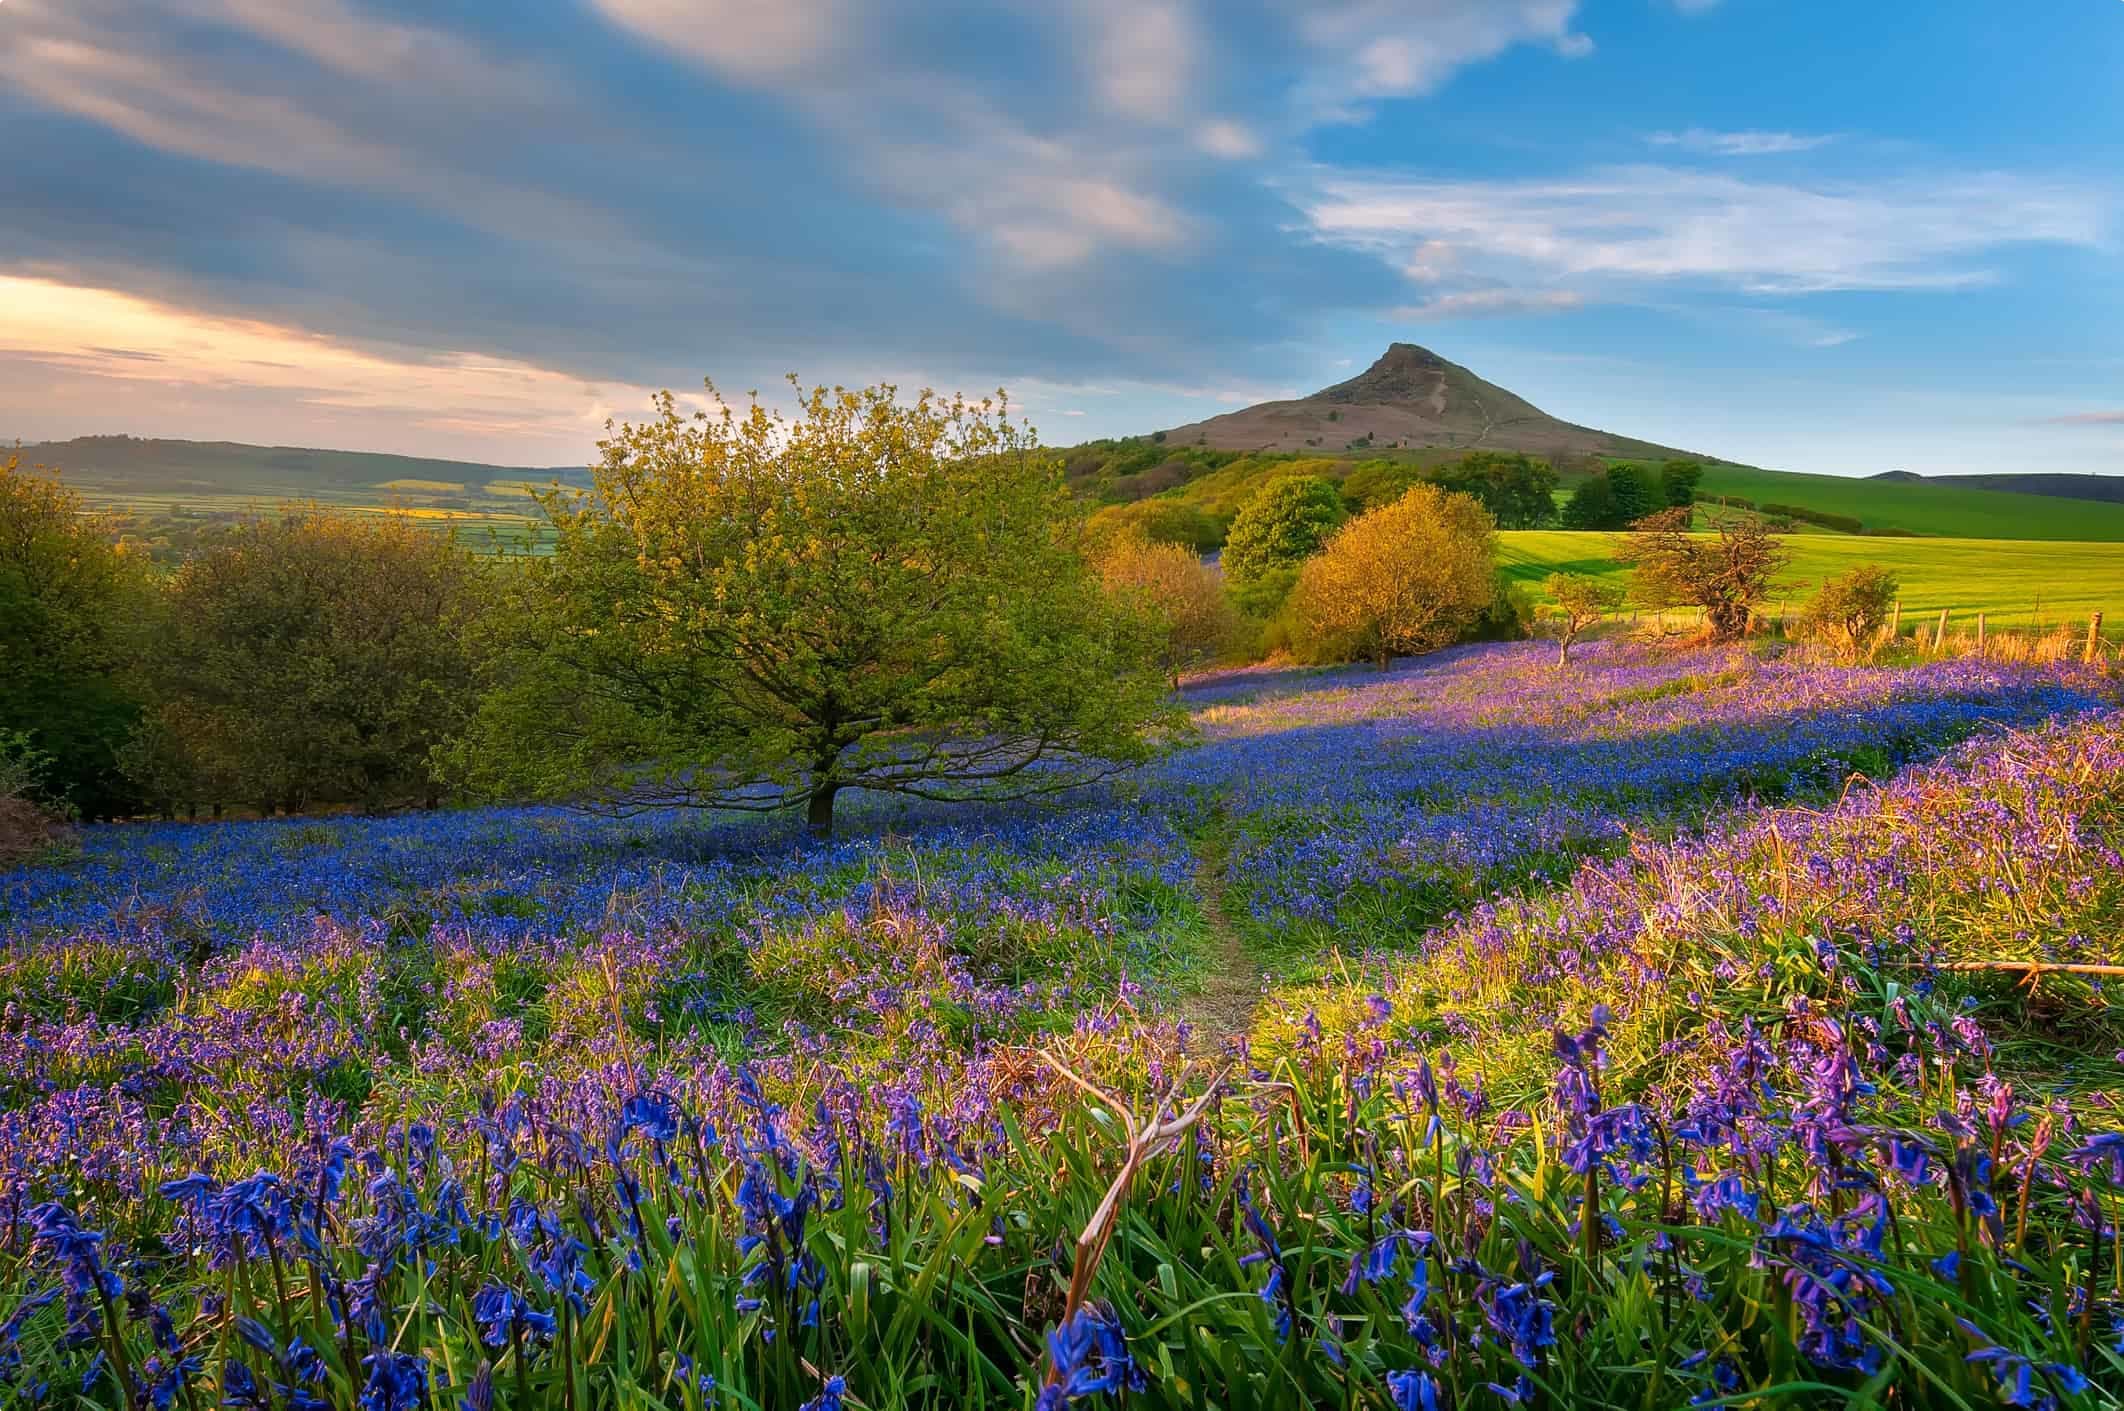 Bluebells in bloom in the North York Moors National Park